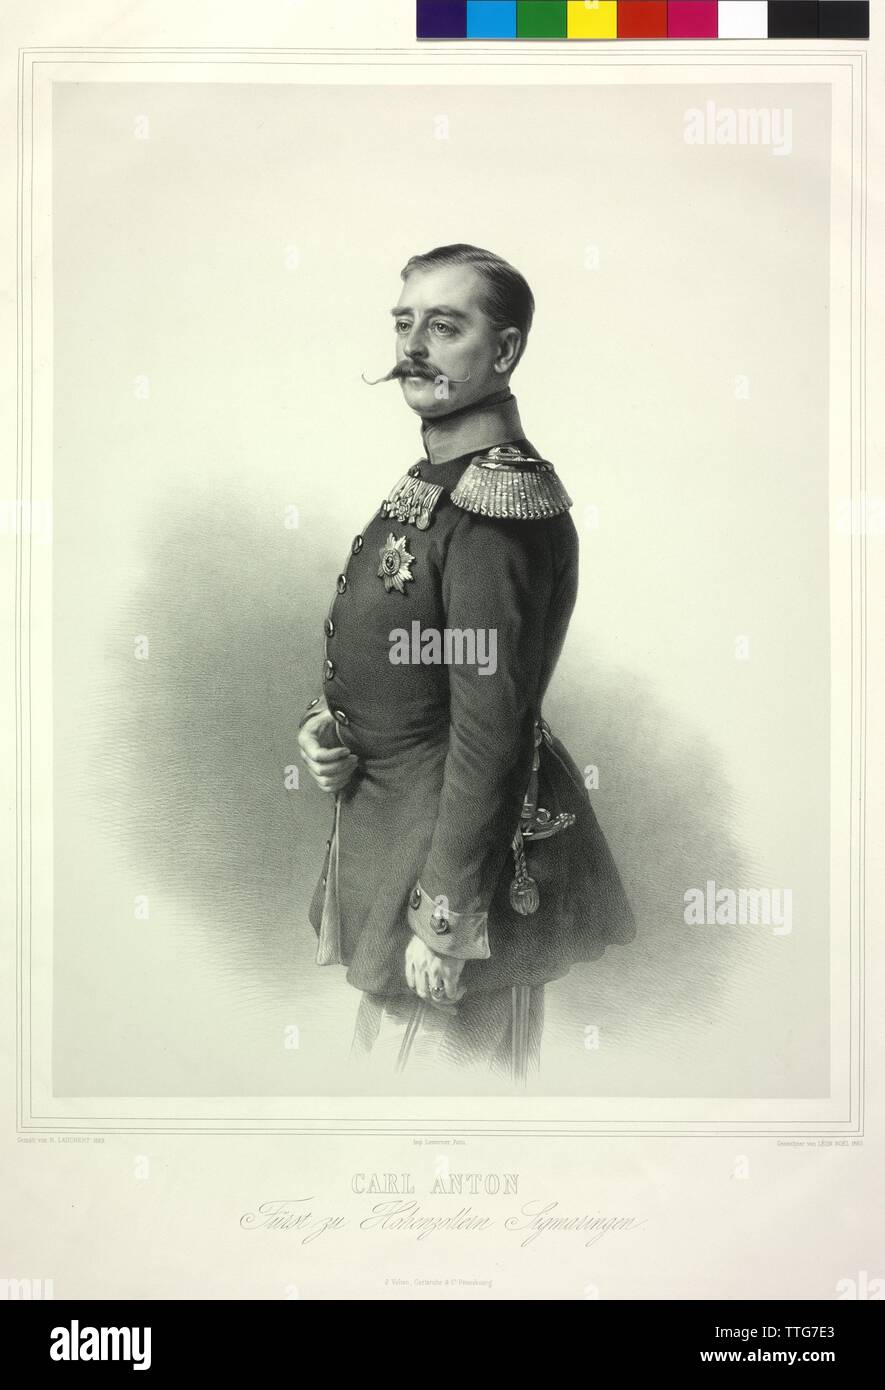 Carl Anton Prince of House of Hohenzollern Sigmaringen, lithograph by Alphonse Leon Noël based on a painting by Richard Lauchert. China, Additional-Rights-Clearance-Info-Not-Available Stock Photo